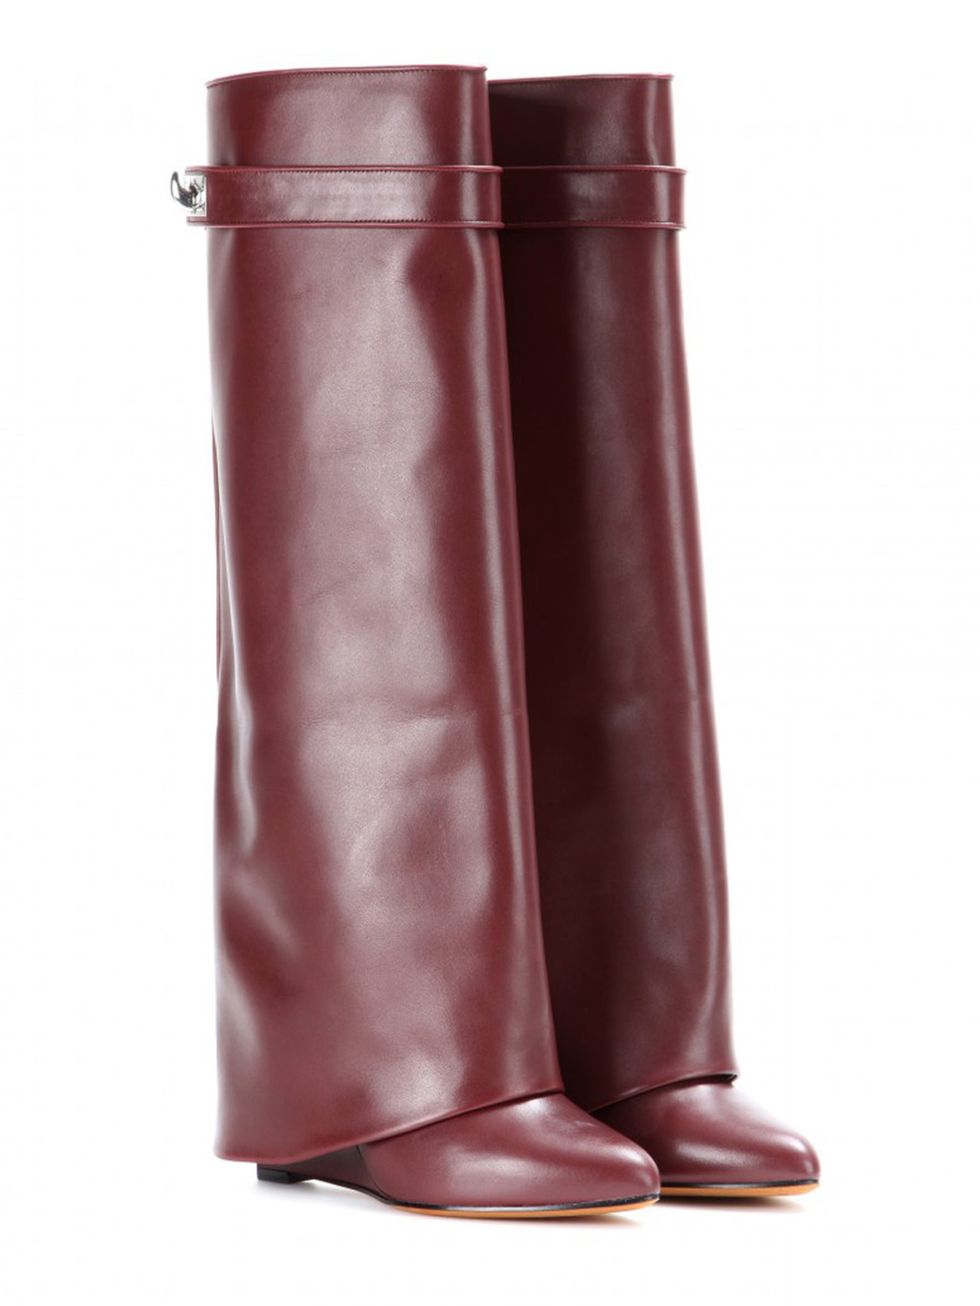 Brown, Textile, Maroon, Leather, Liver, Tan, Cylinder, Boot, 